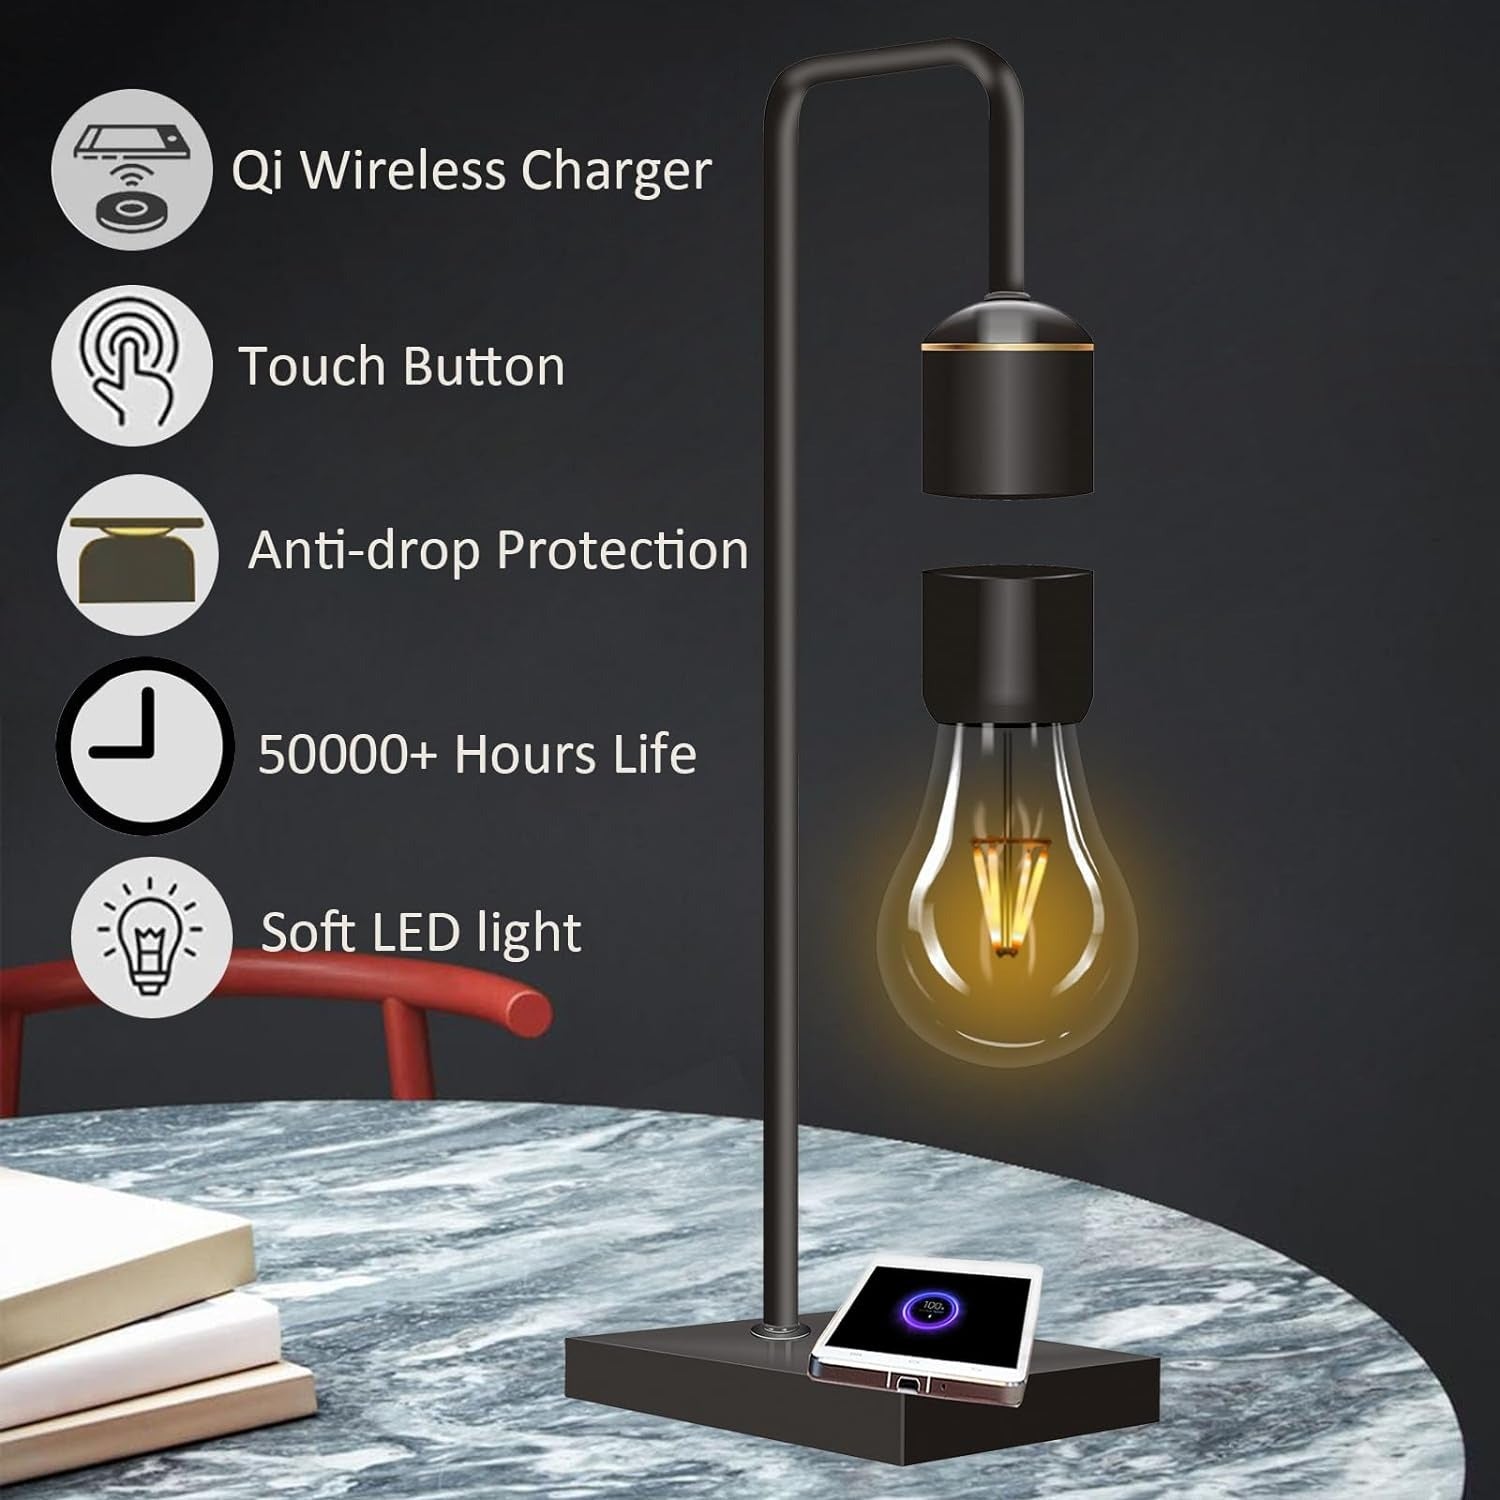 Magnetic Levitating Light Bulb with Luxury Wireless Charging Pad (Apple/Android)| Levitation Plastic Black Floating Table Lamp| White LED Night Light for Bedrooms Desk| Office Gifts